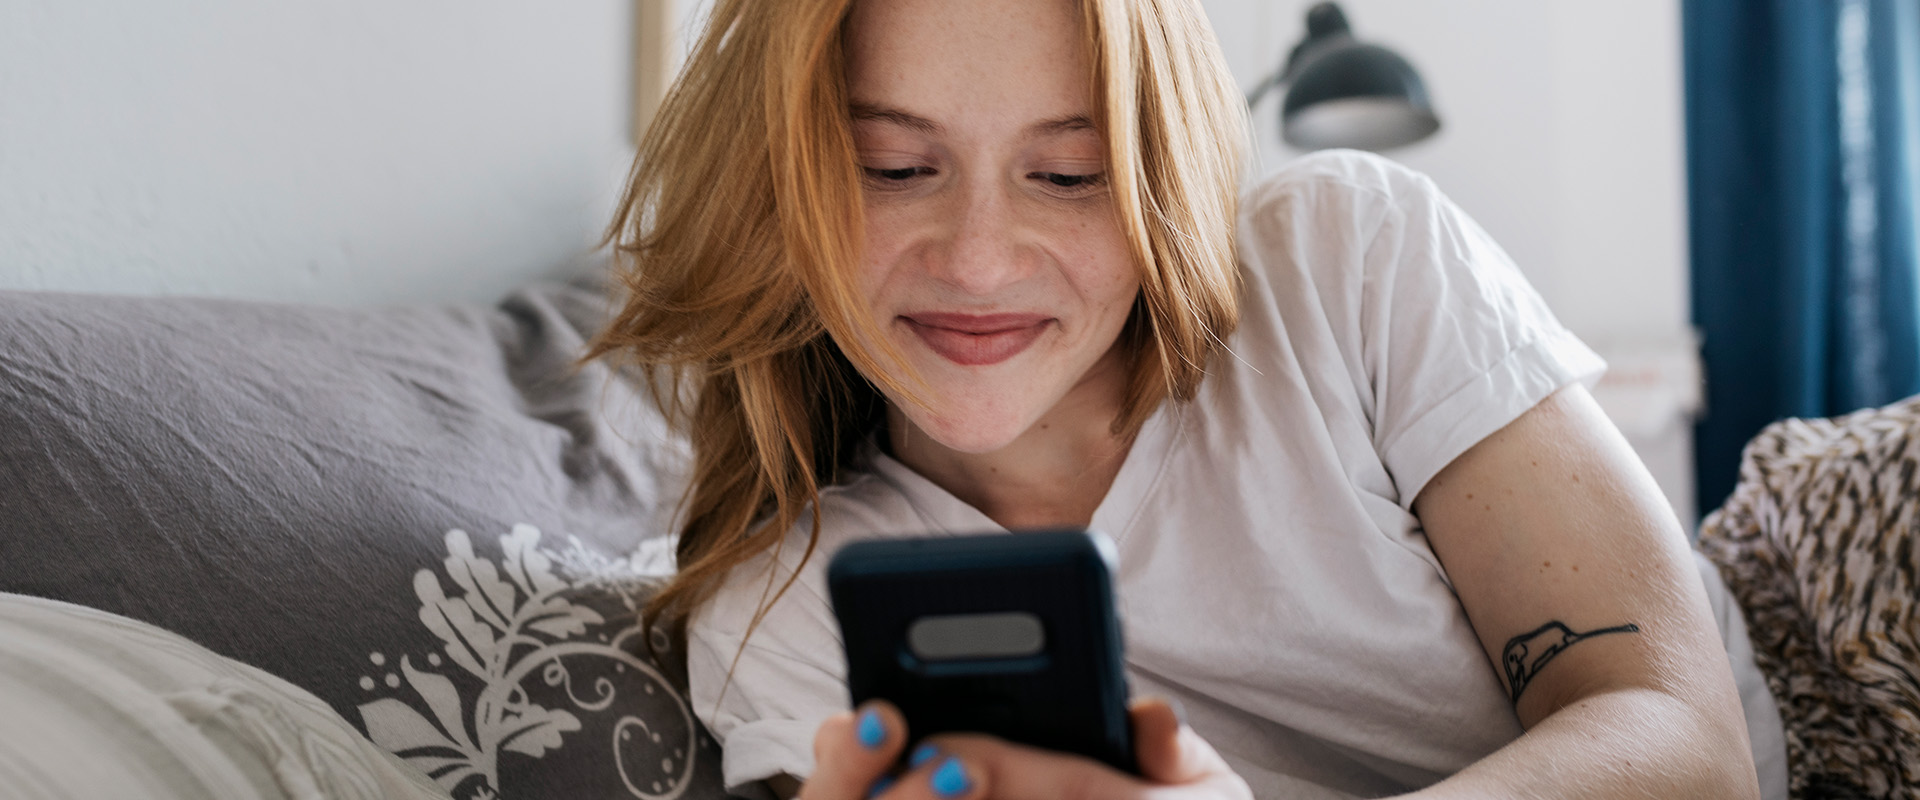 Woman lying in bed and smiling at her mobile phone as a symbol for online dating tips